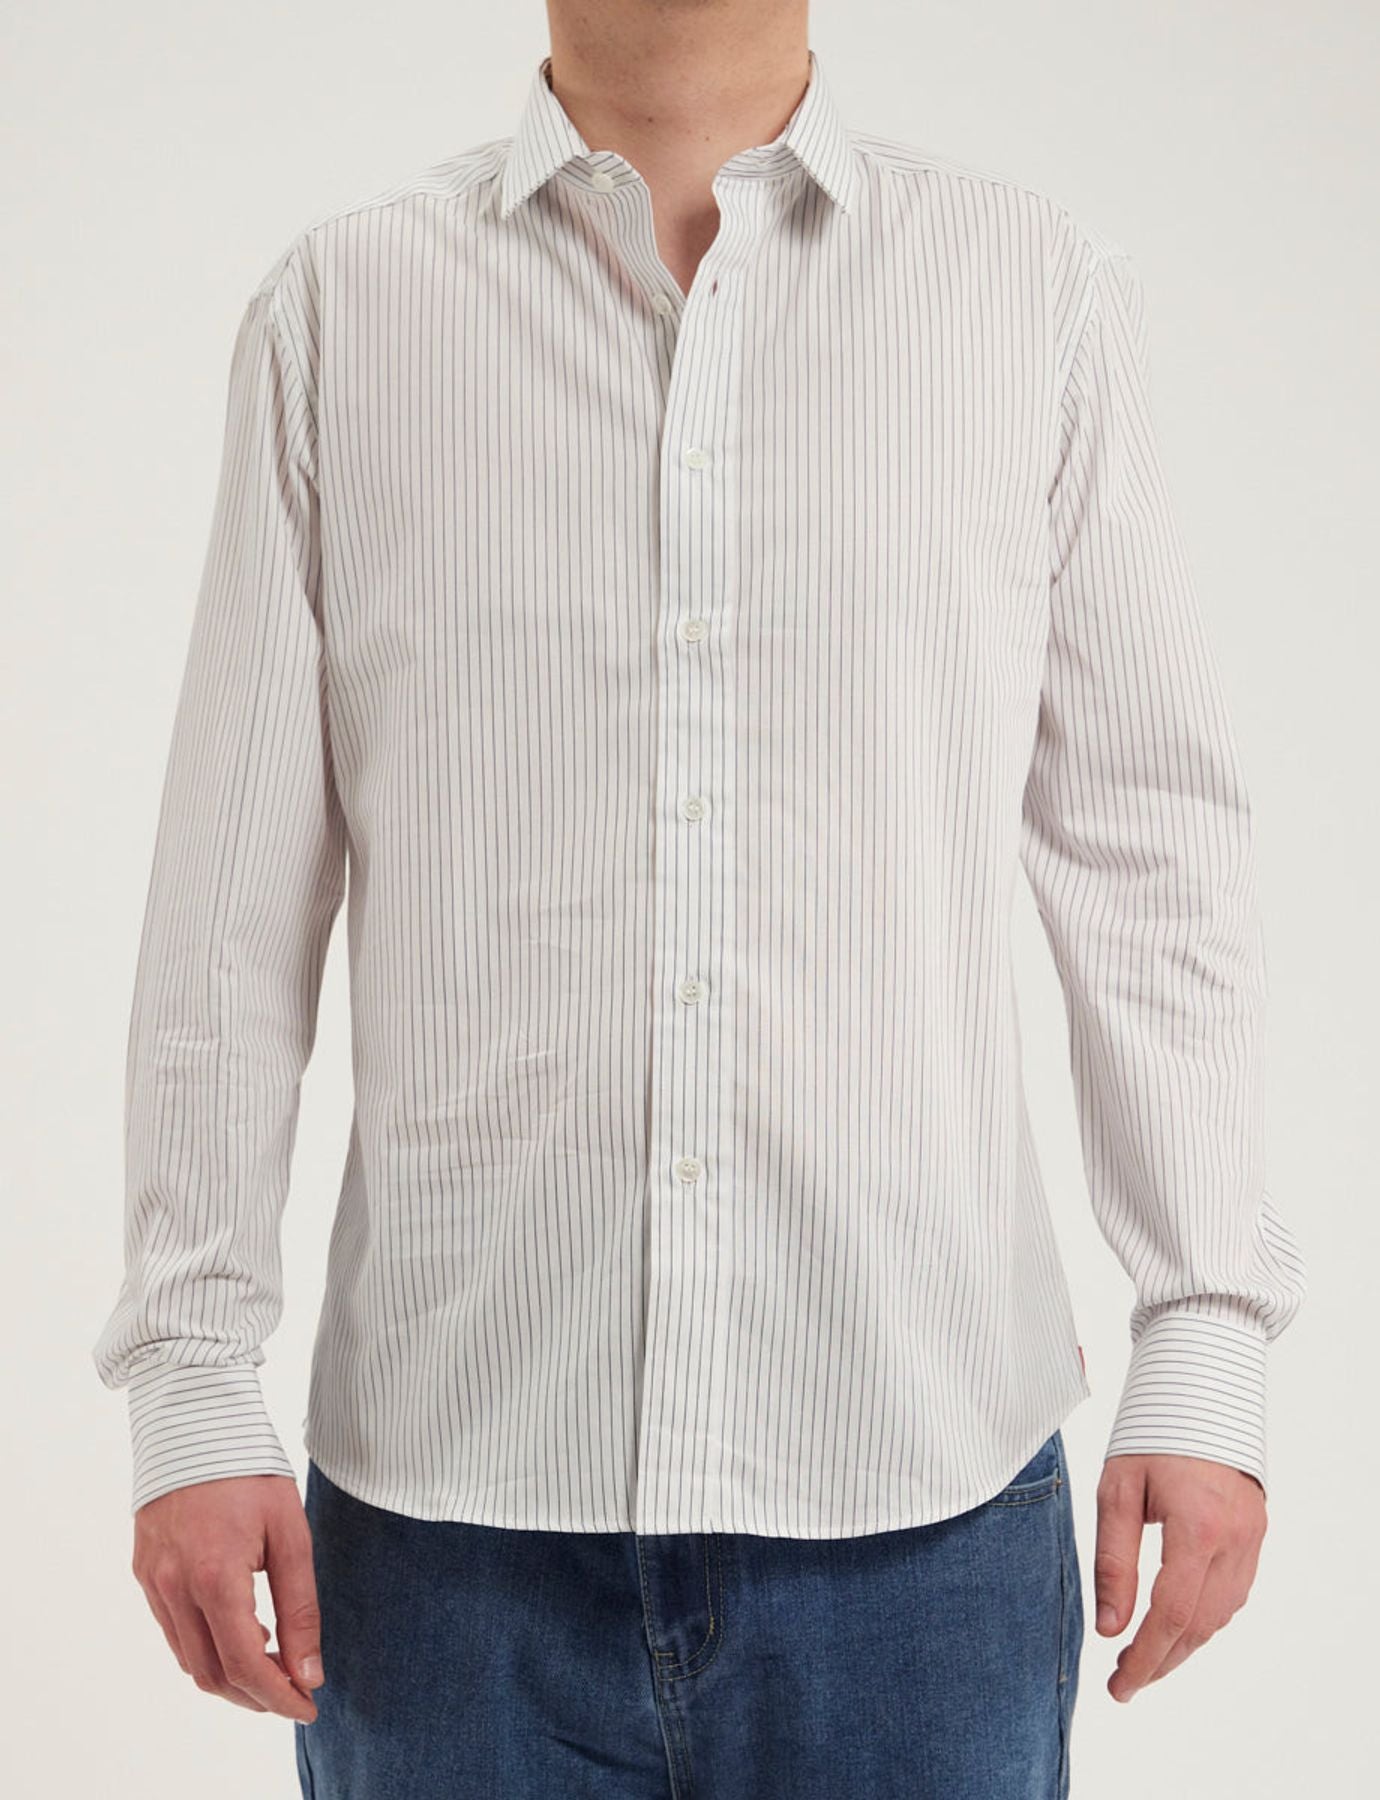 chemise-pour-homme-olivier-blanche-a-rayures-bleues